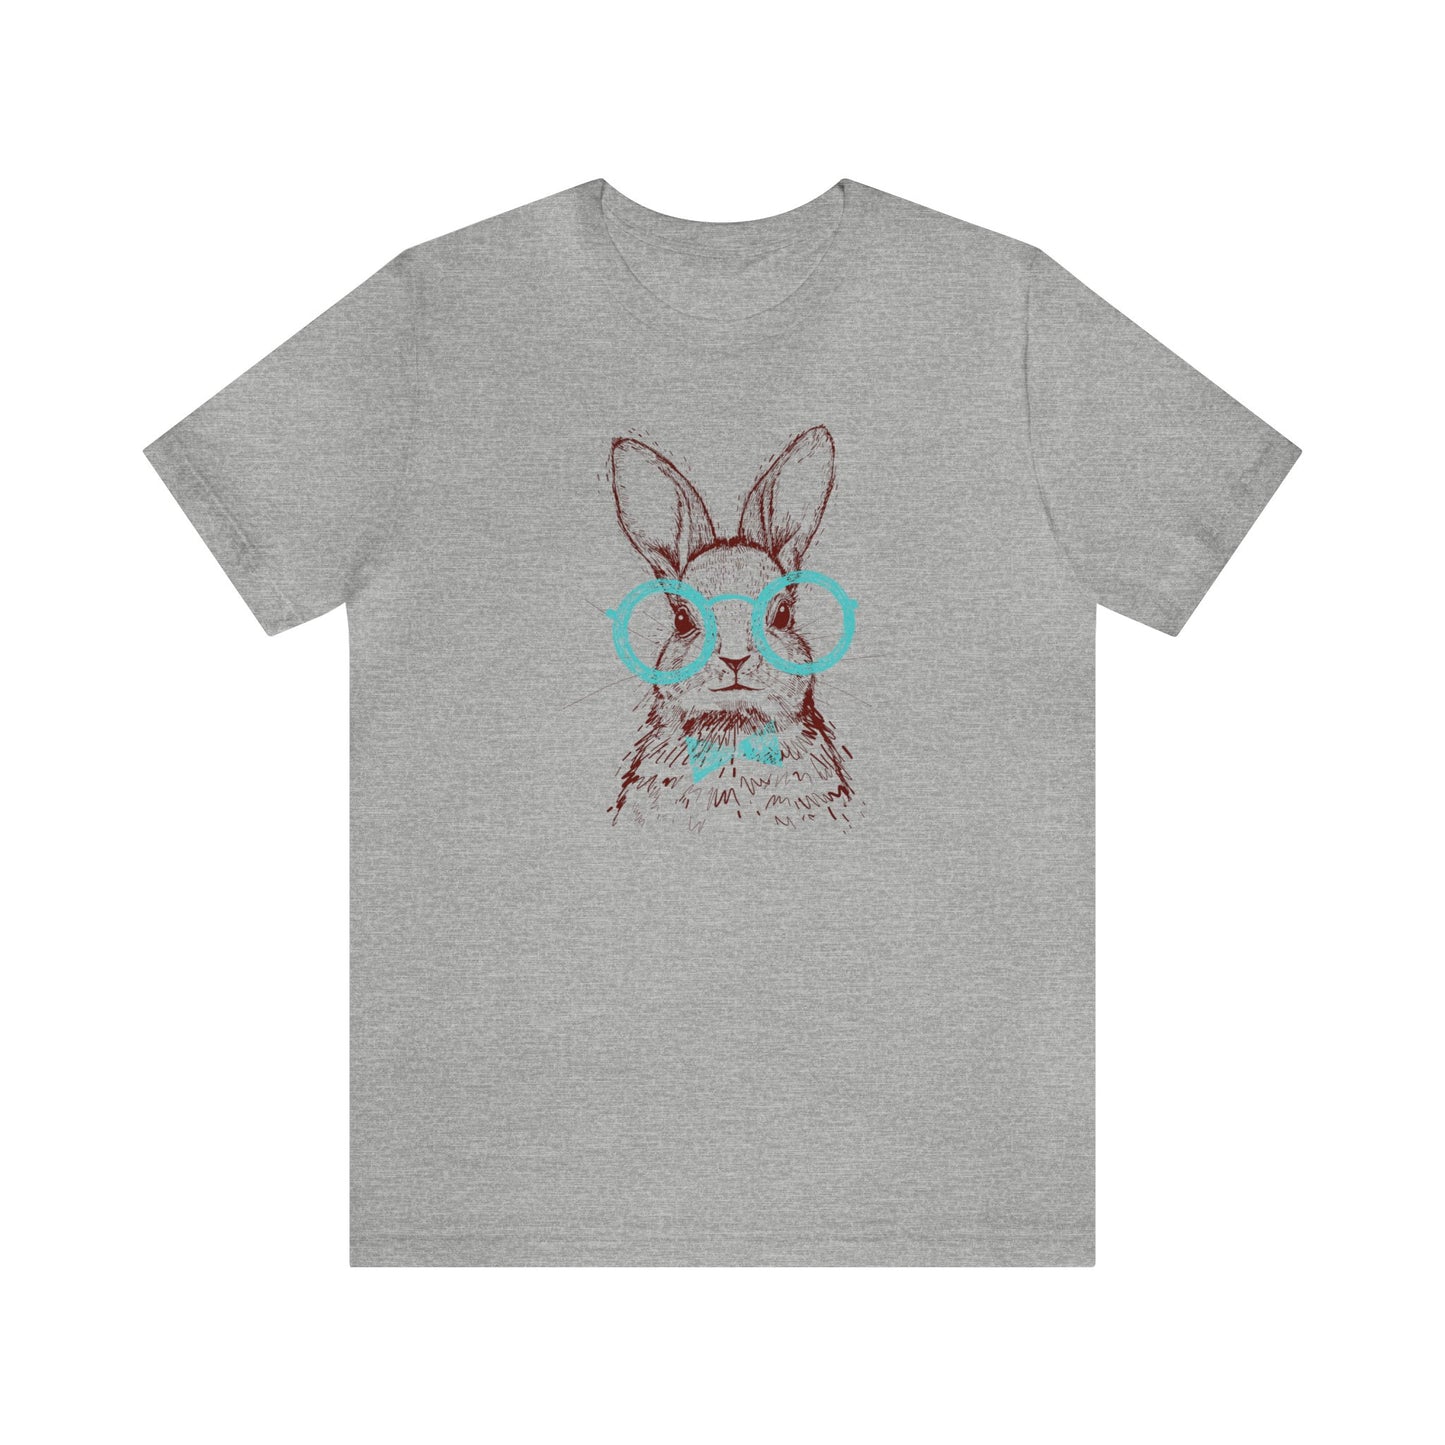 Hipster Bunny T-Shirt For Easter T Shirt For Cute Rabbit T Shirt